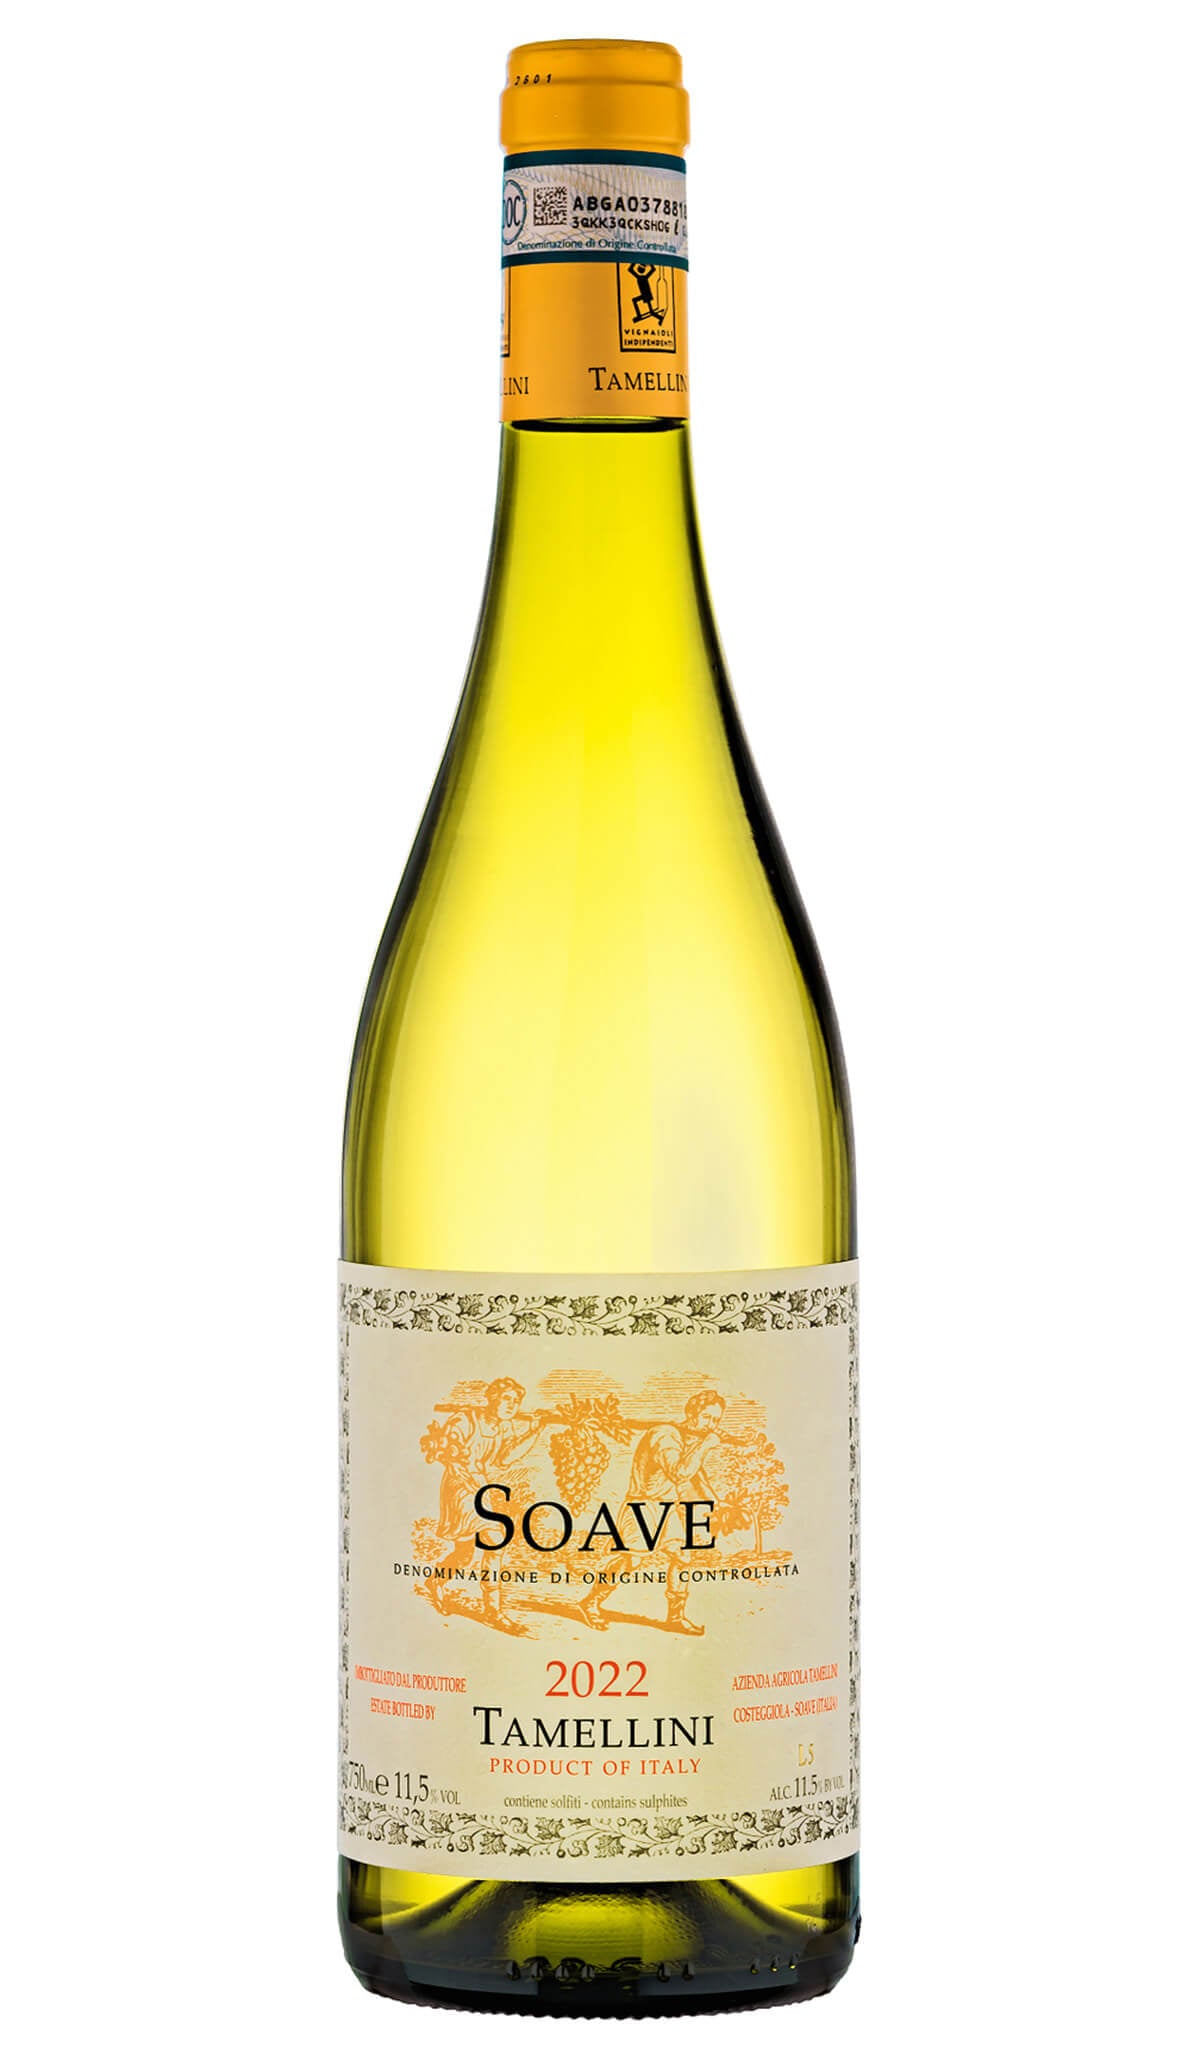 Find out more or buy Tamellini Italian Soave 2022 vintage available online at Wine Sellers Direct - Australia’s independent liquor specialists.